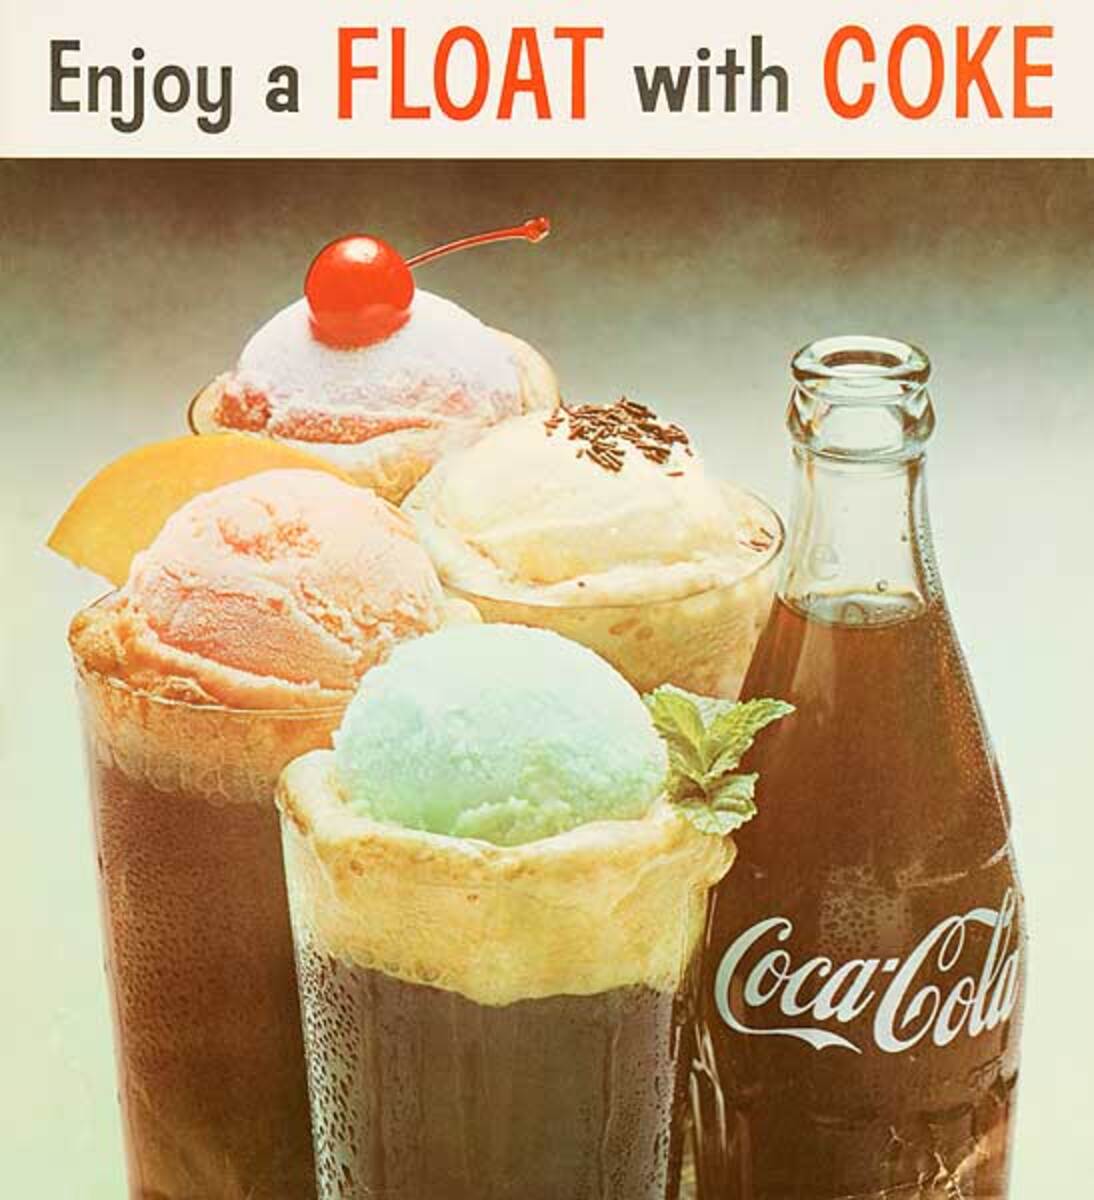 Enjoy a Float With a Coke Original Advertising Poster with Coke bottle